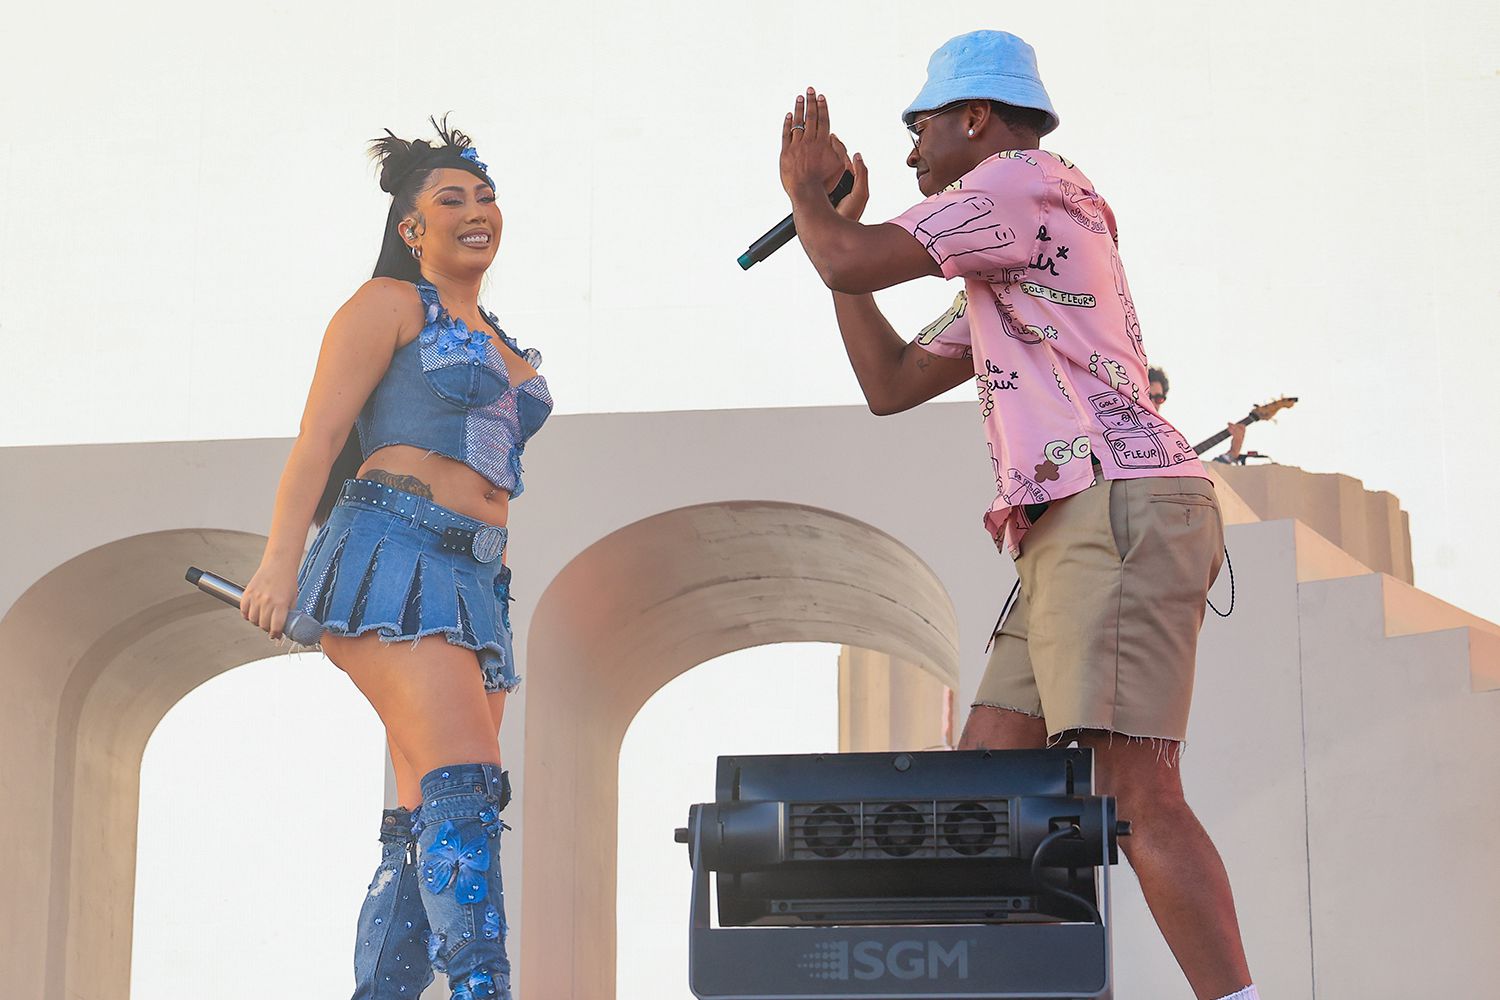 Kali Uchis and Tyler, the Creator perform onstage at the 2023 Coachella Valley Music & Arts Festival